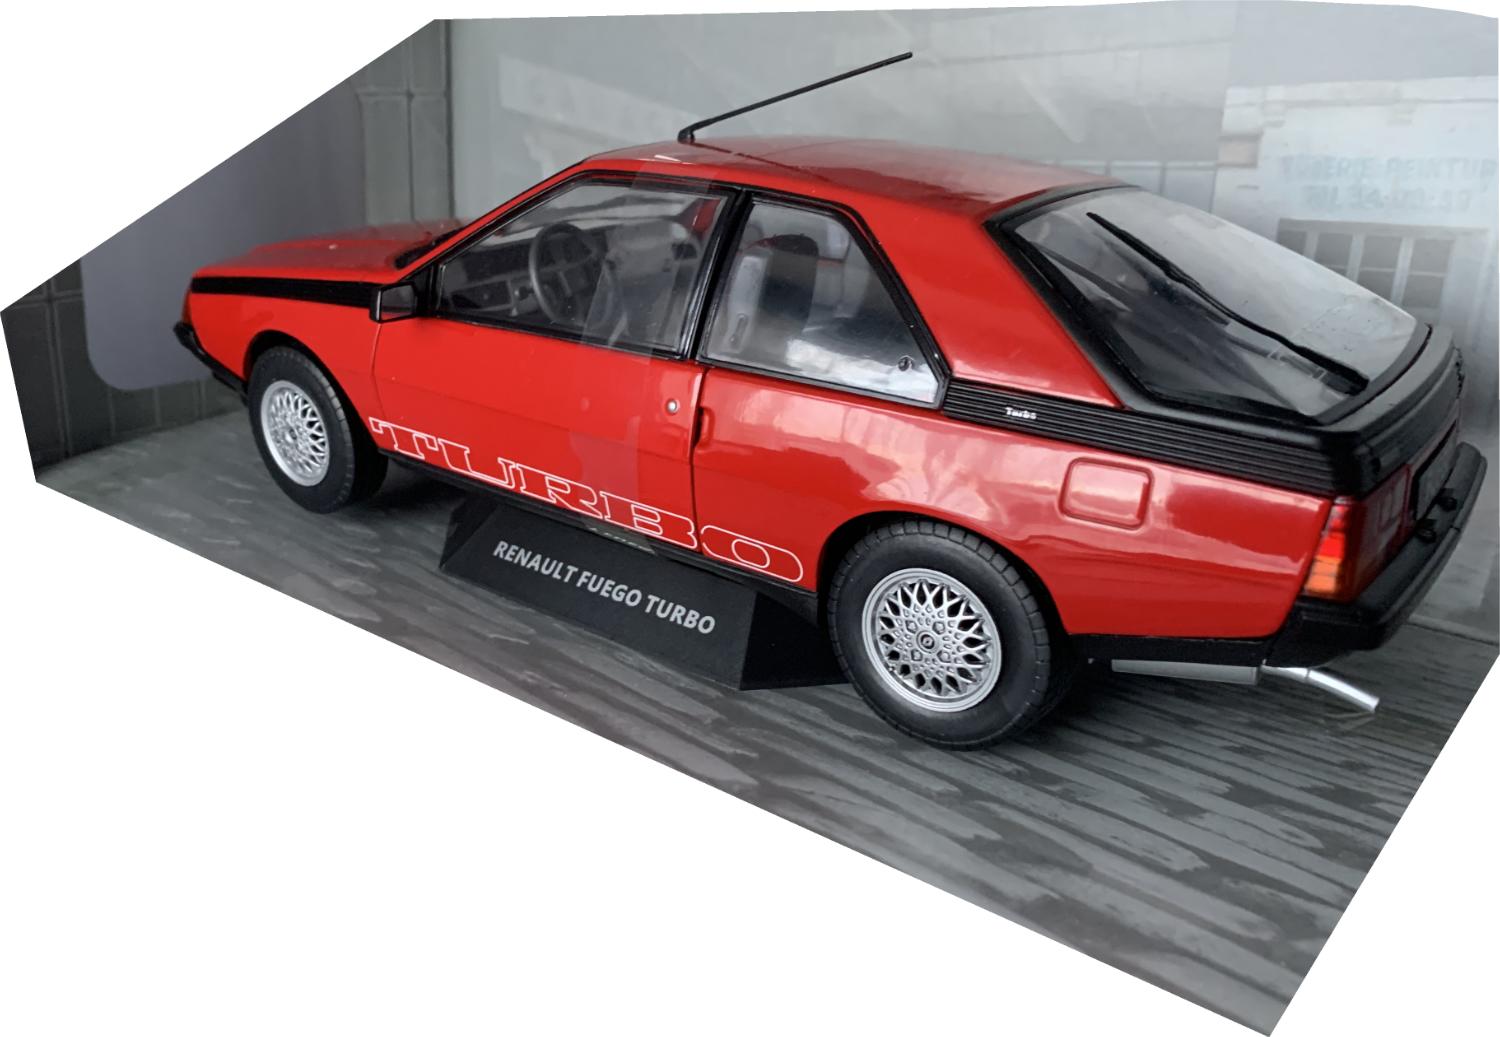 Renault Fuego Turbo 1980 in red 1:18 scale model from Solido